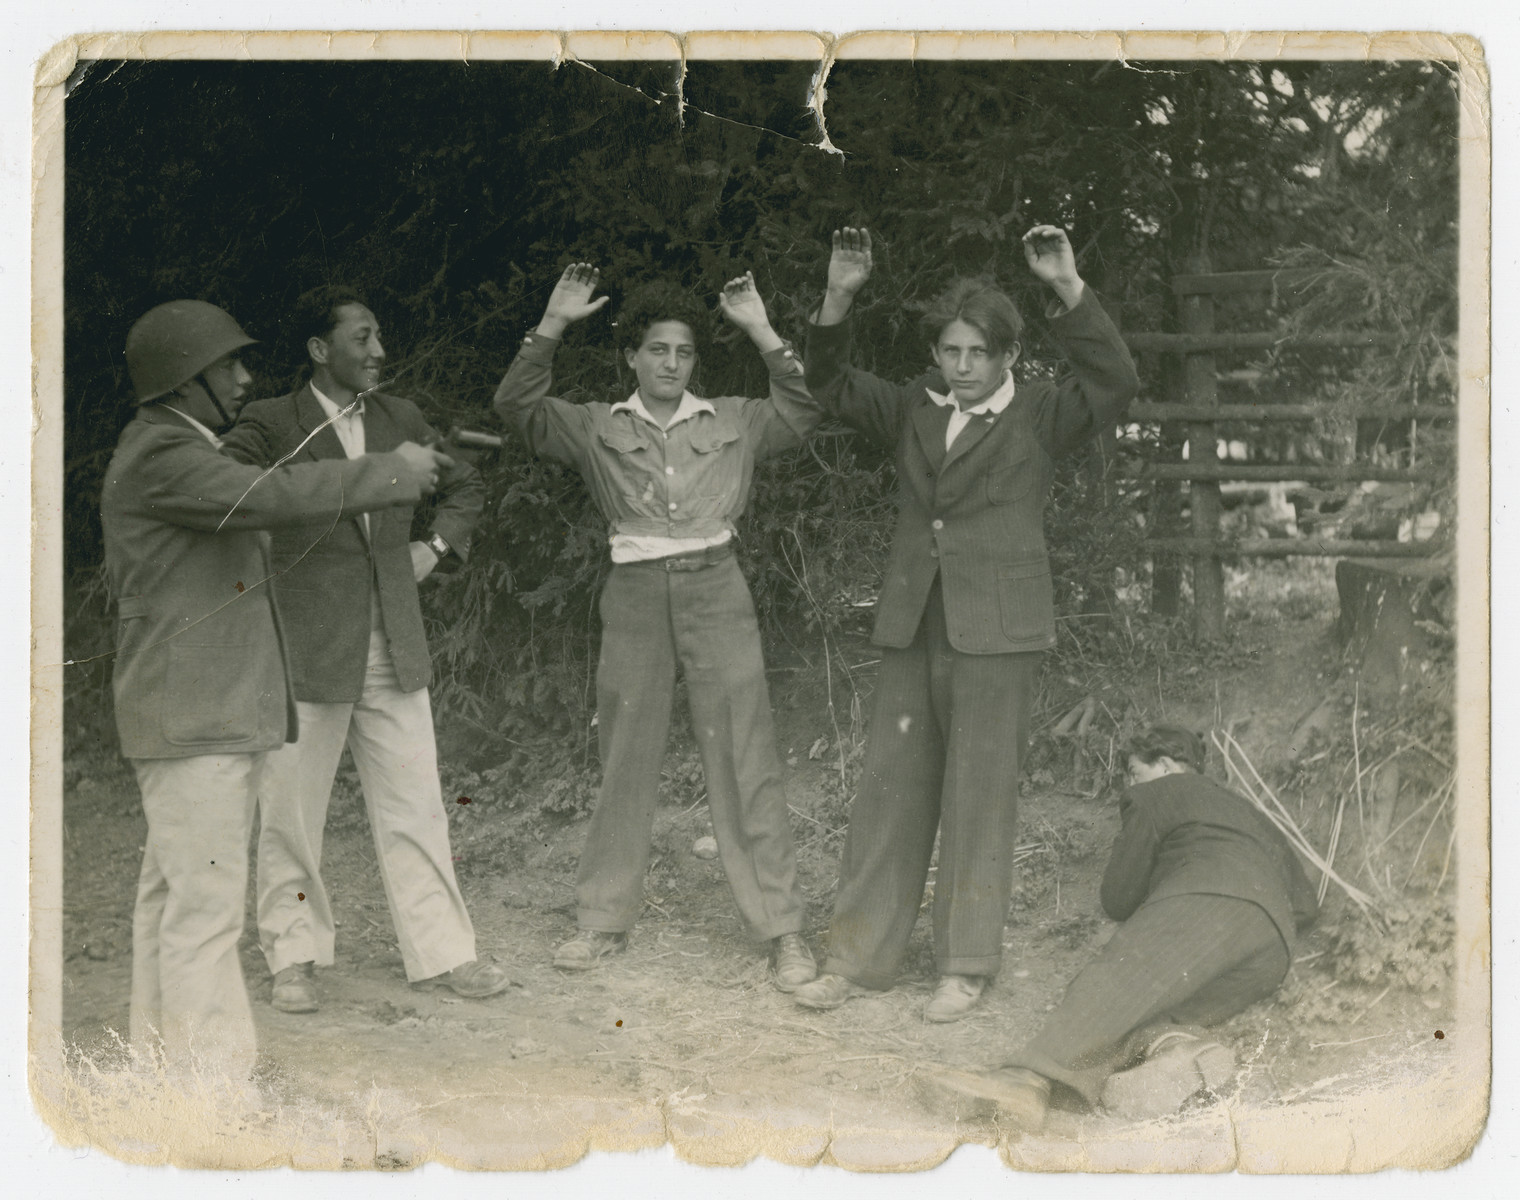 Young survivors play act an arrest.

One of the men is Mordechai Hellman.